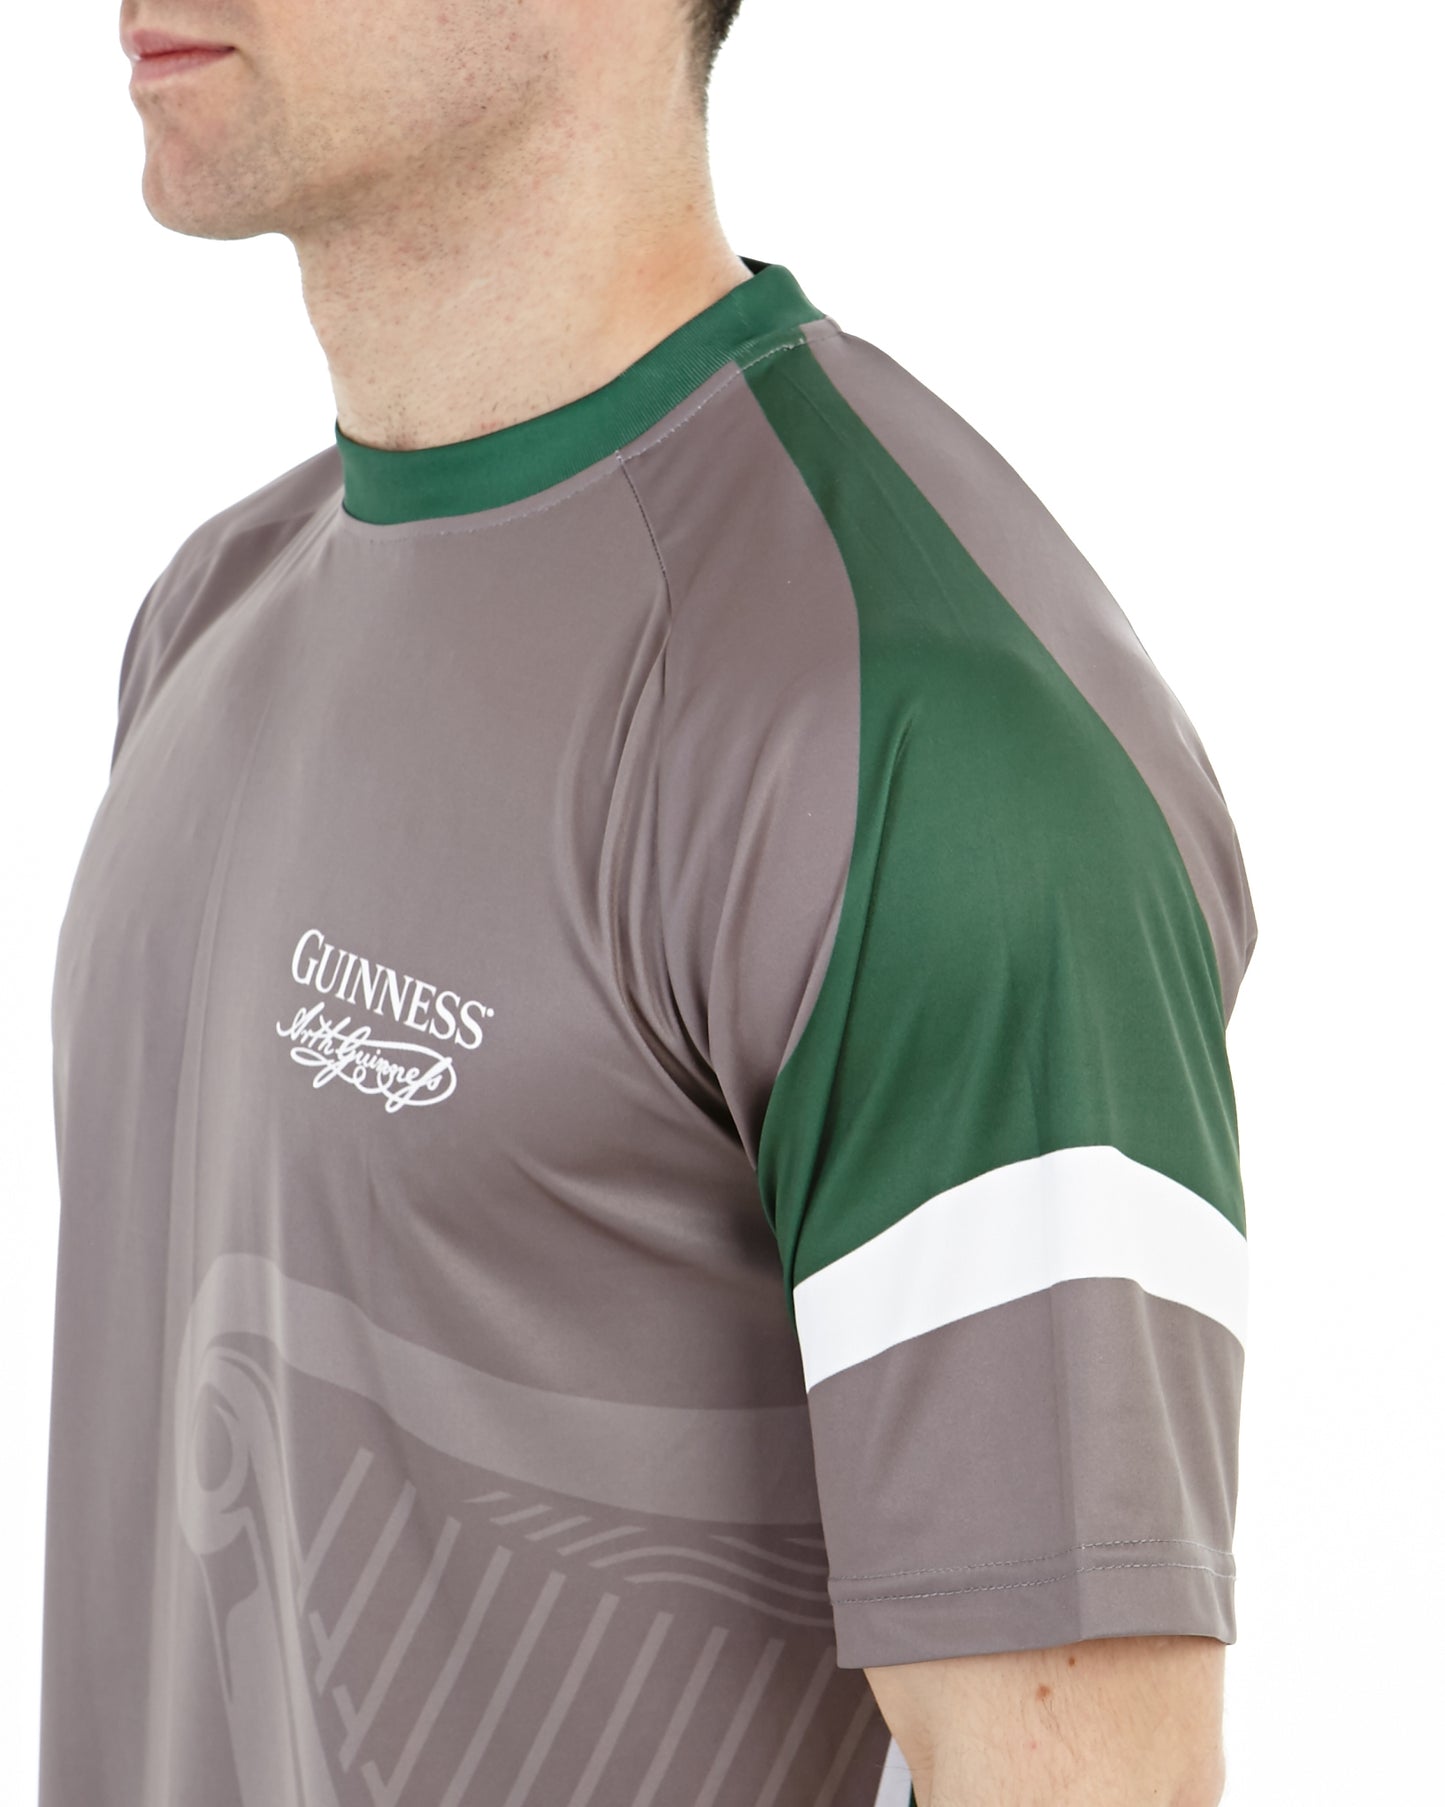 Guinness Performance Football Jersey for the ultimate soccer fan.